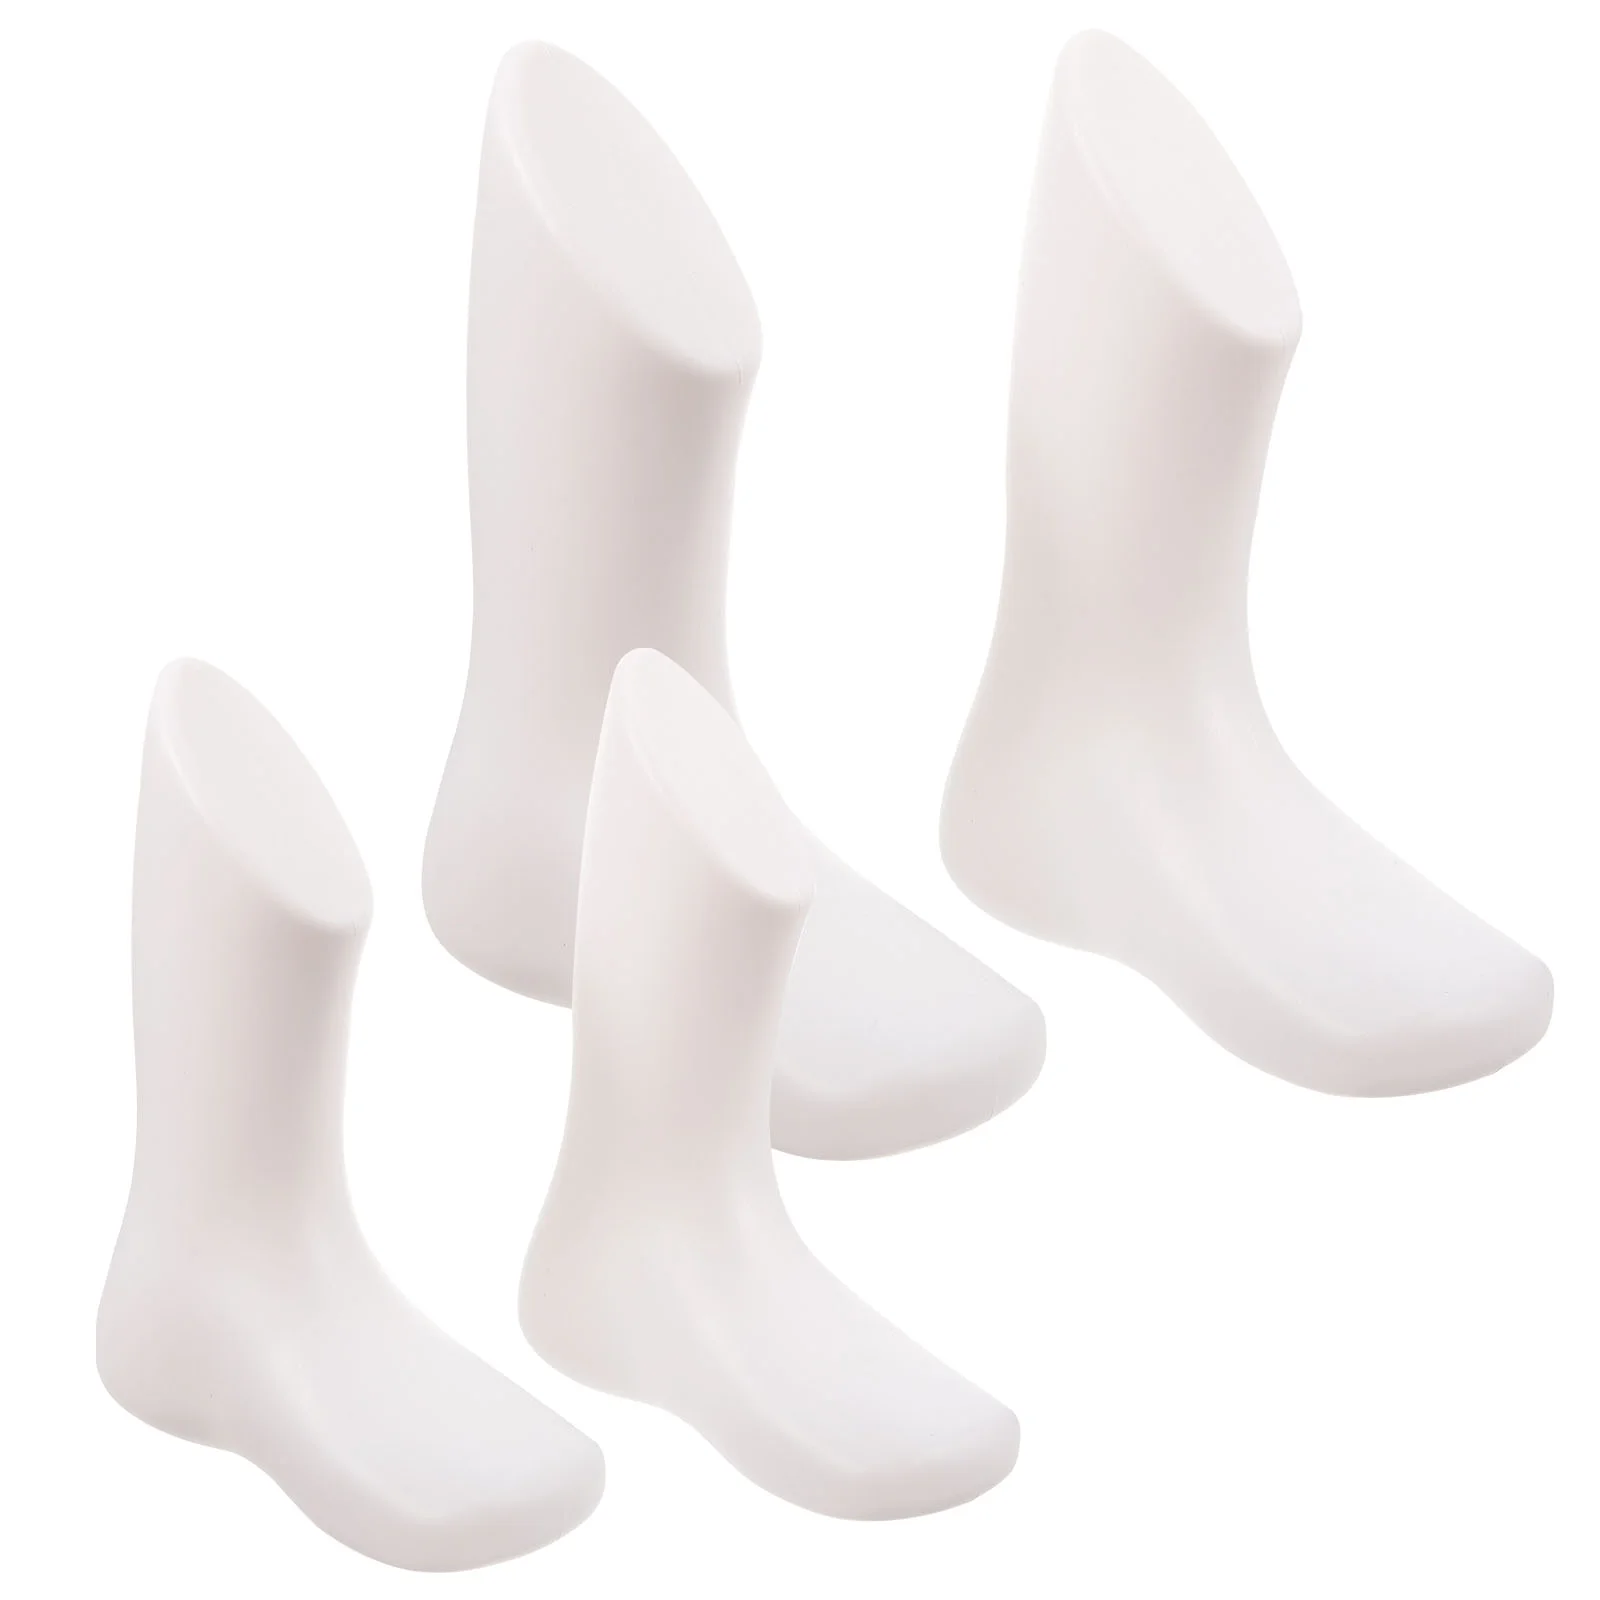 Baby Feet Mannequin Plastic Foot Models Toddler Shoes Supports Shoe Forms Stand Sock Display